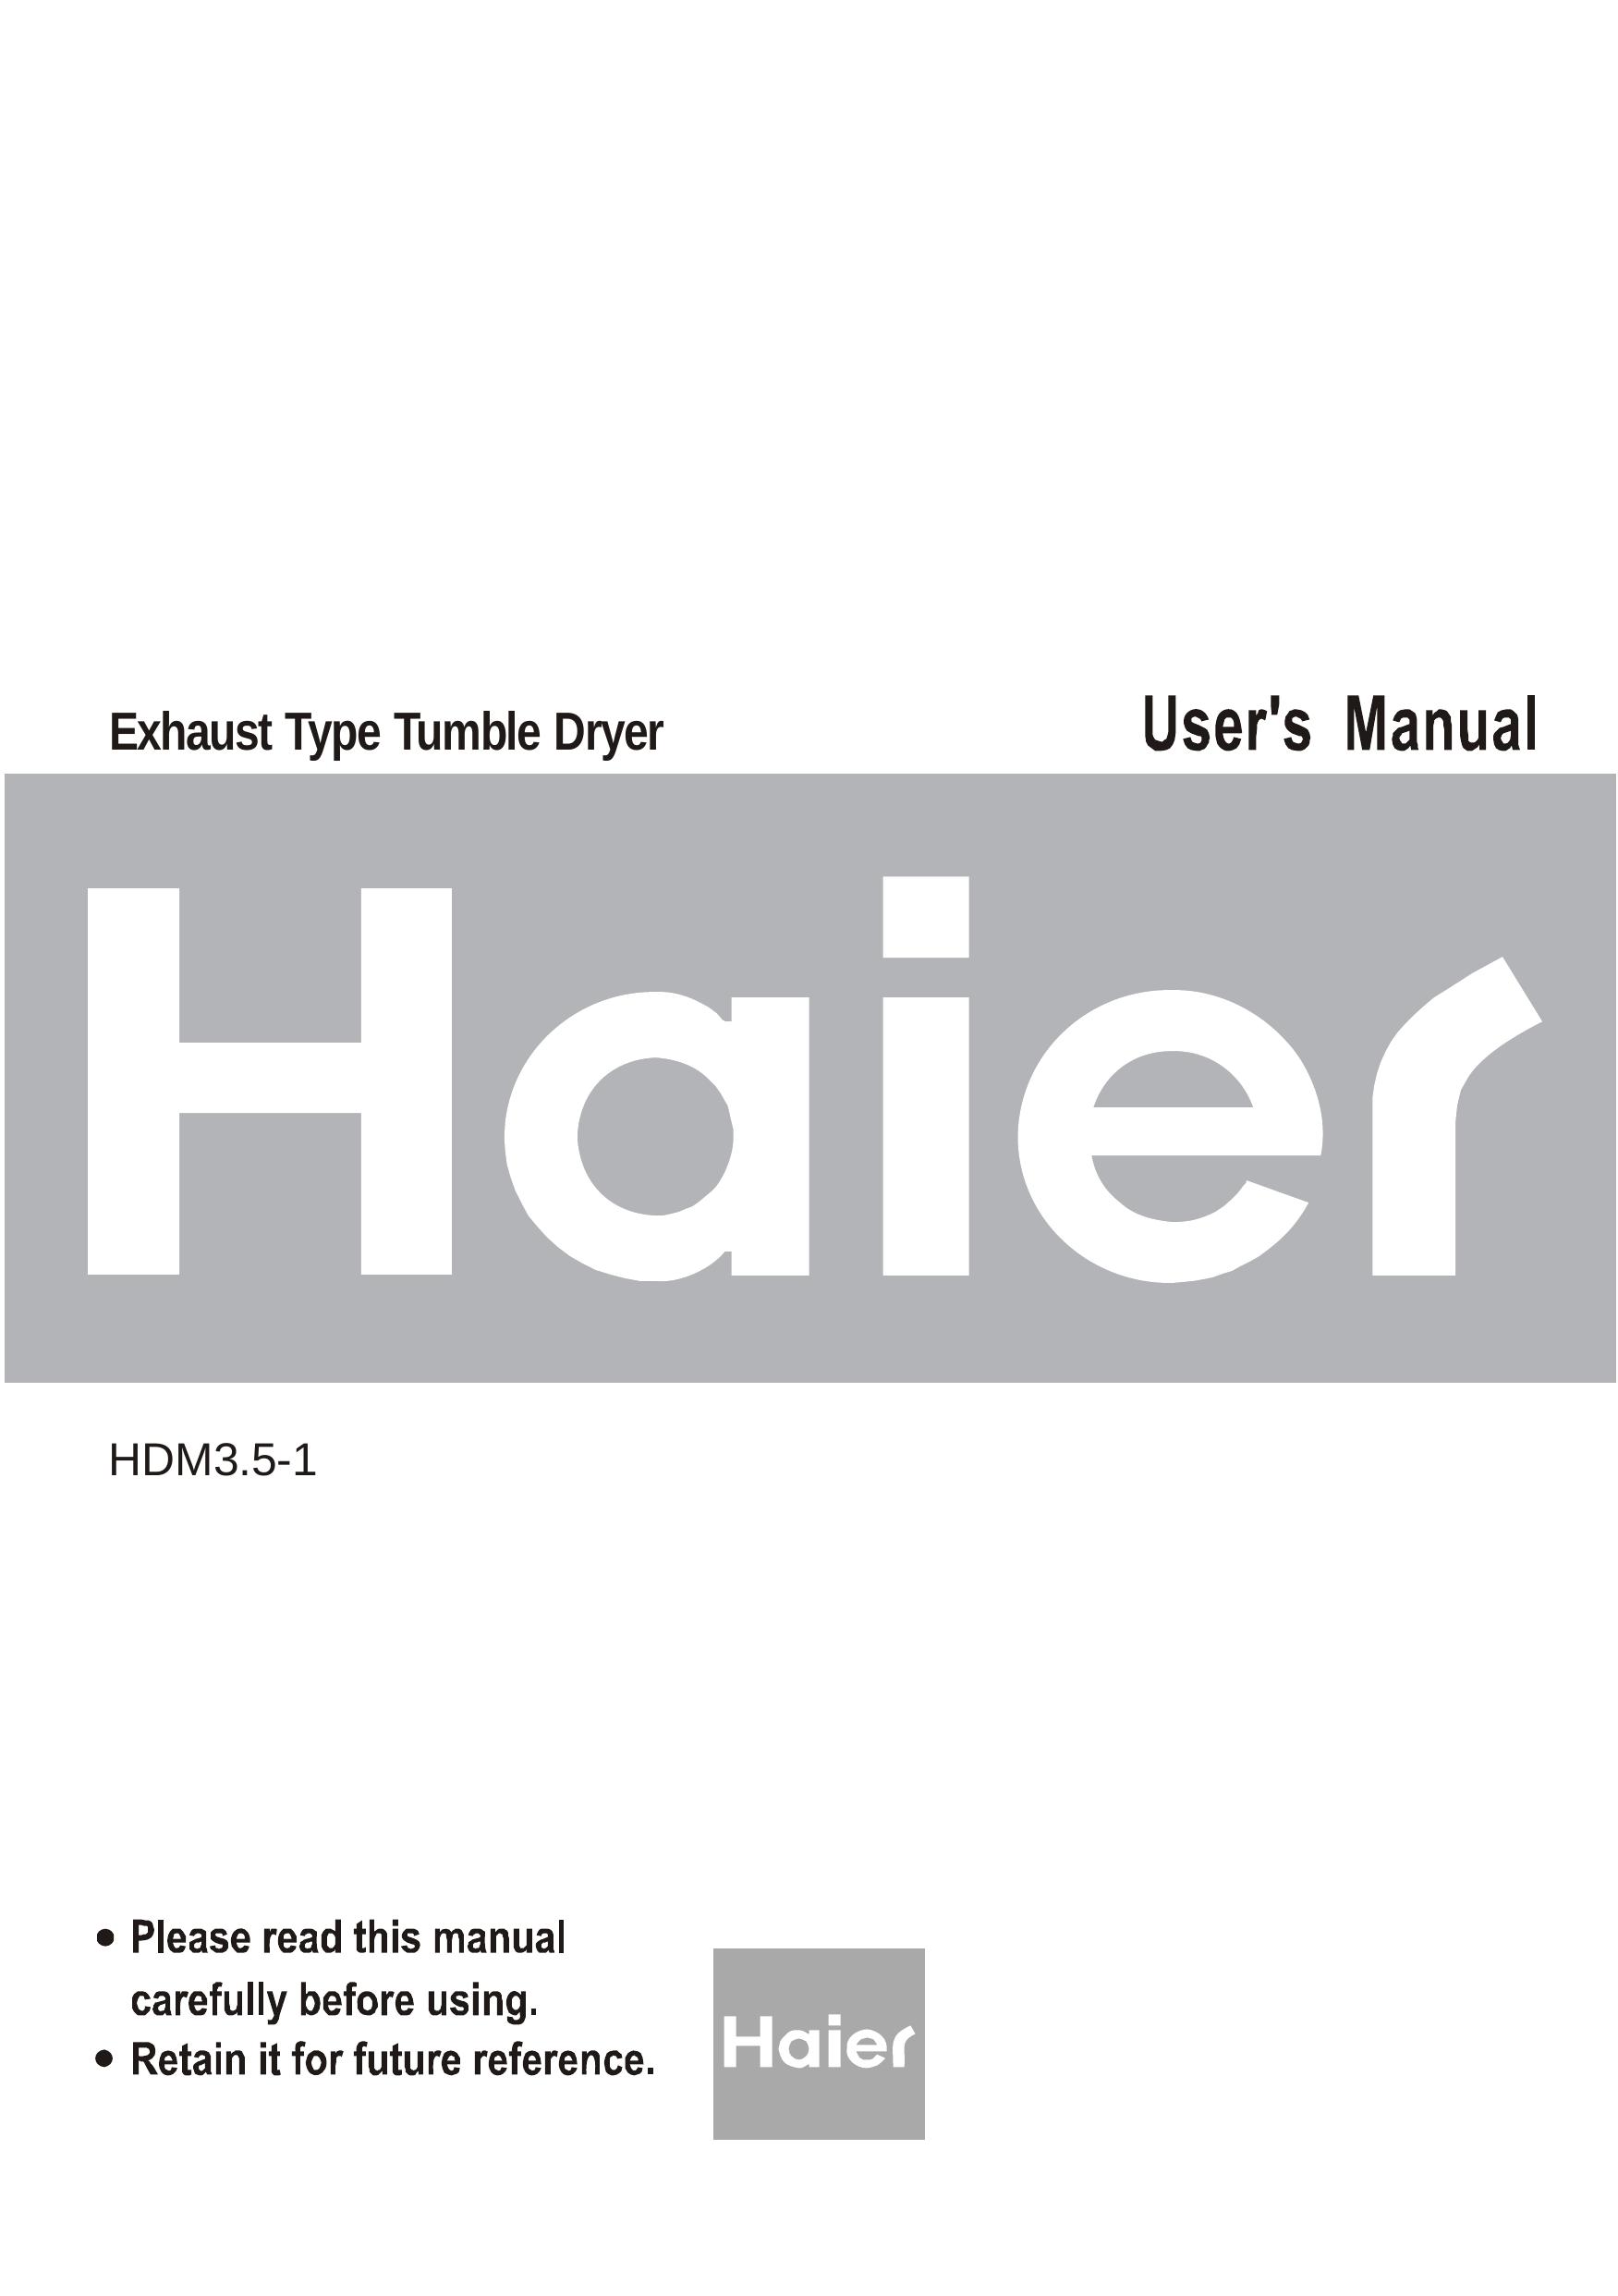 Haier HDM3.5-1 Clothes Dryer User Manual